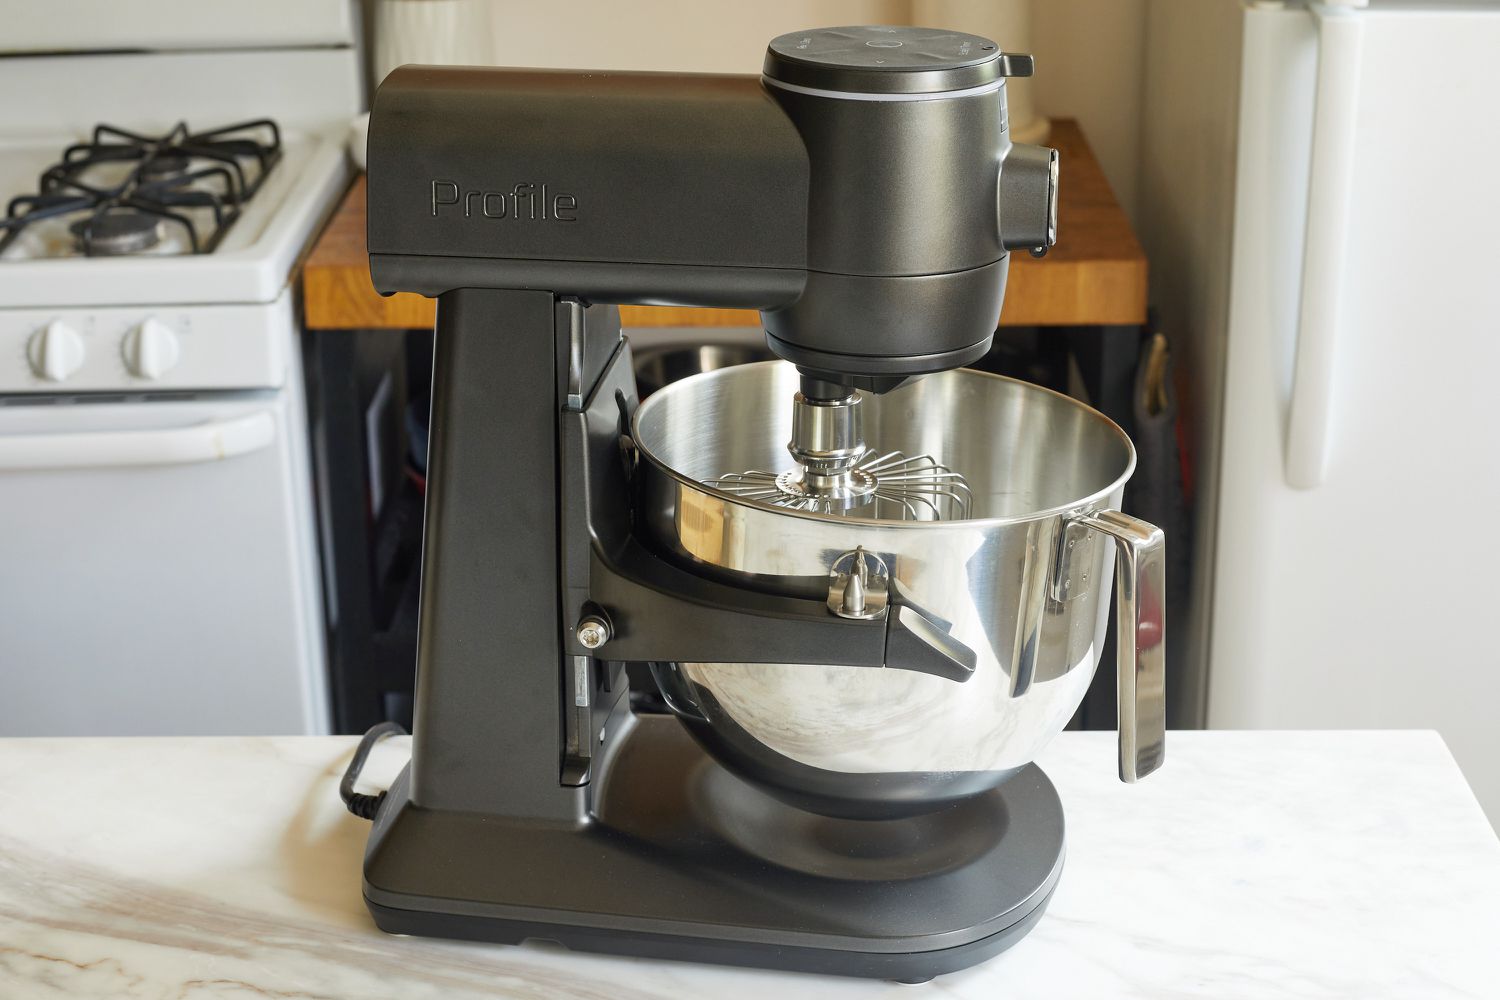 GE Profile stand mixer